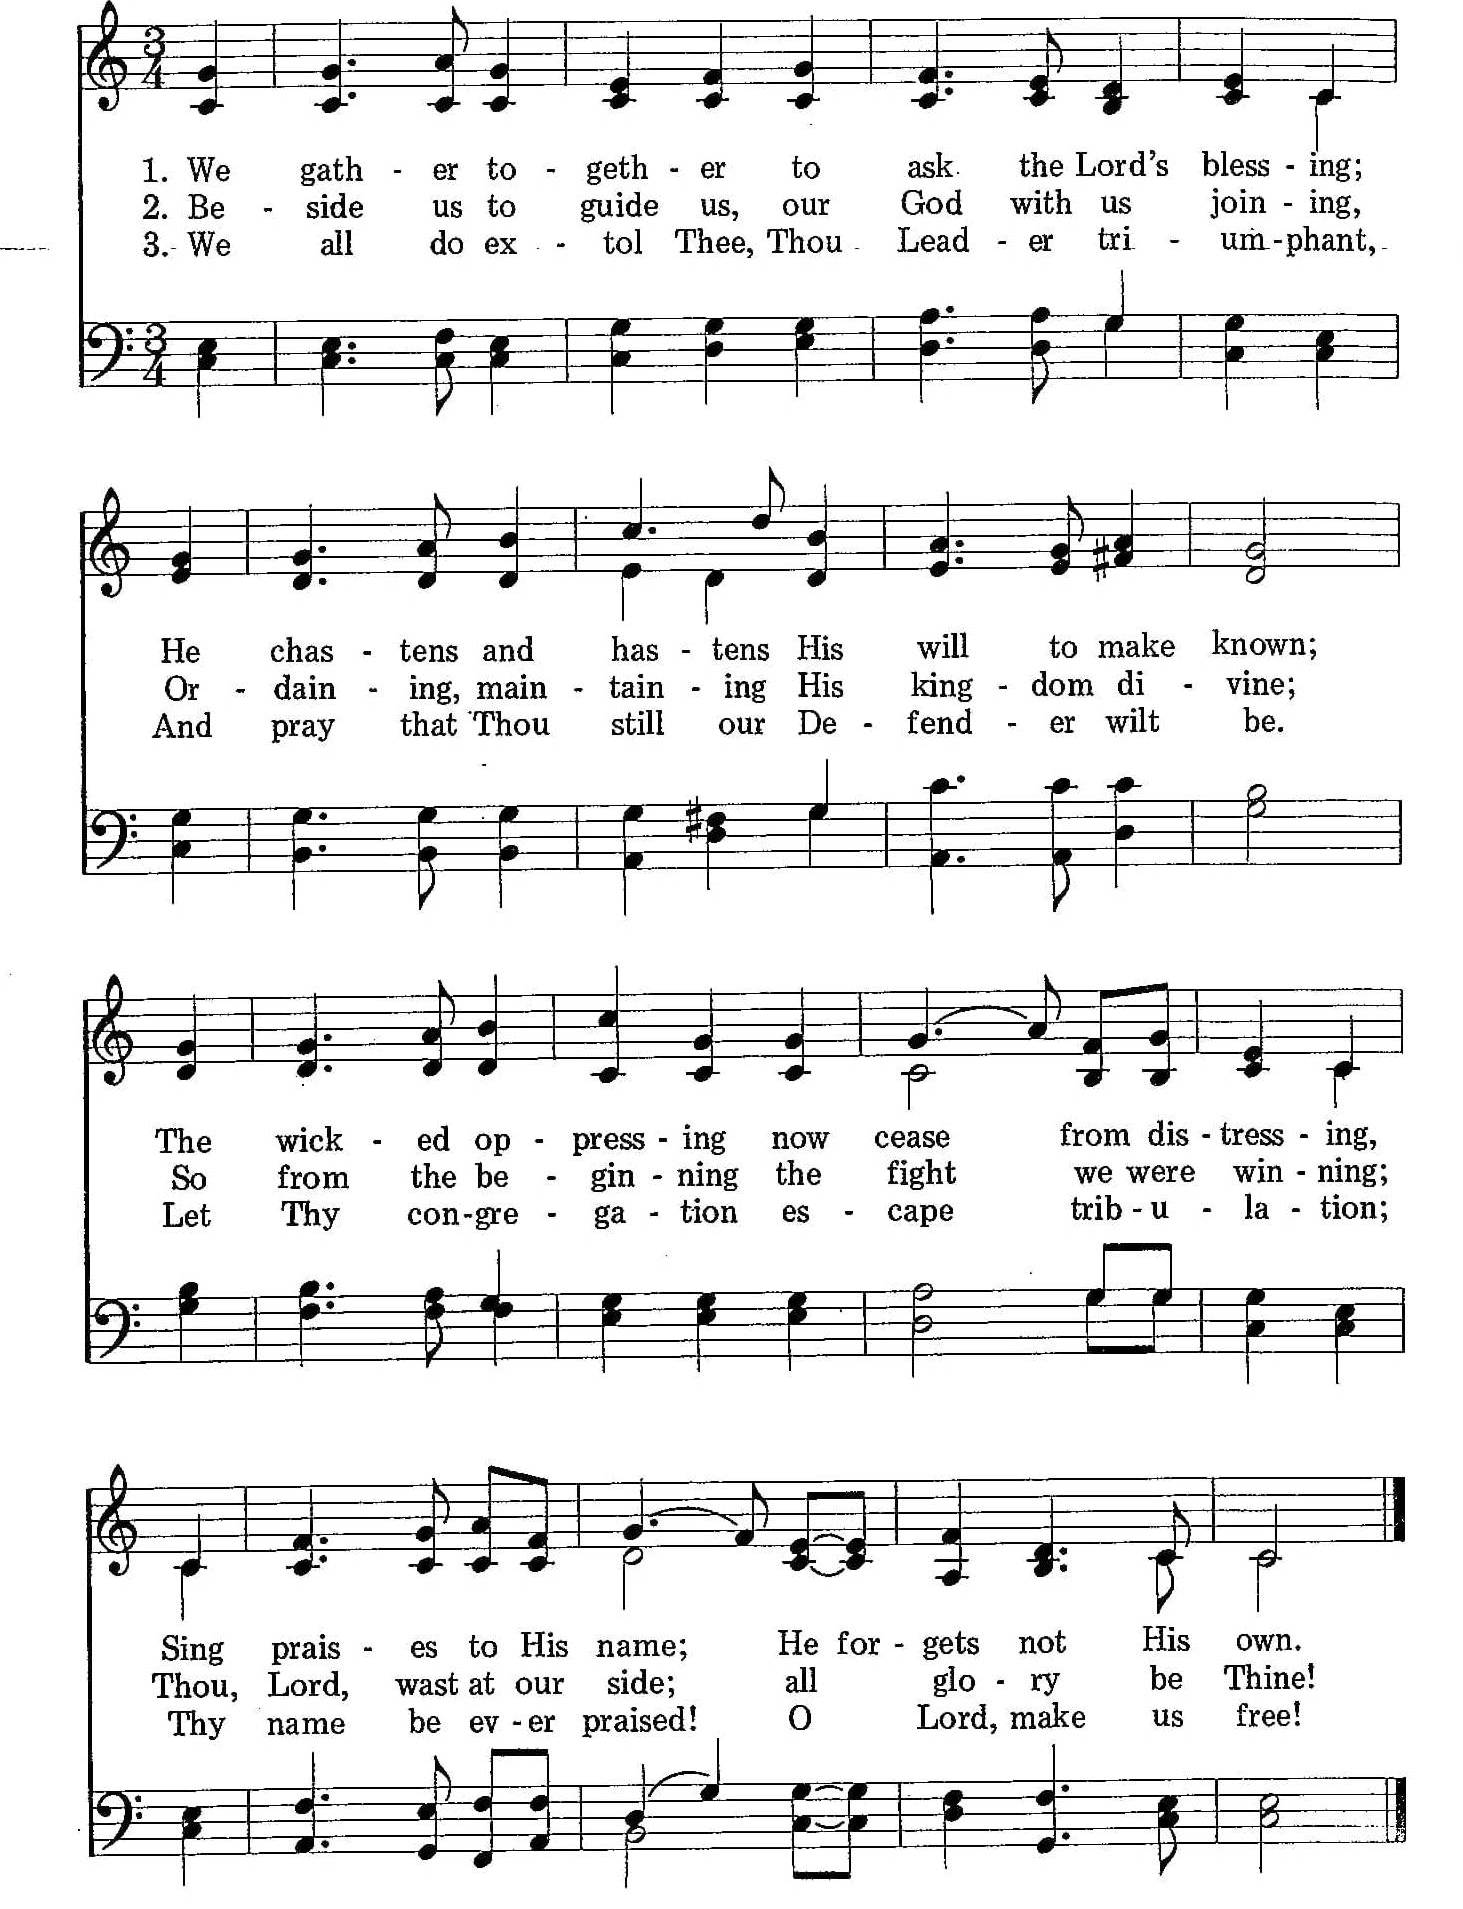 008 – We Gather Together sheet music